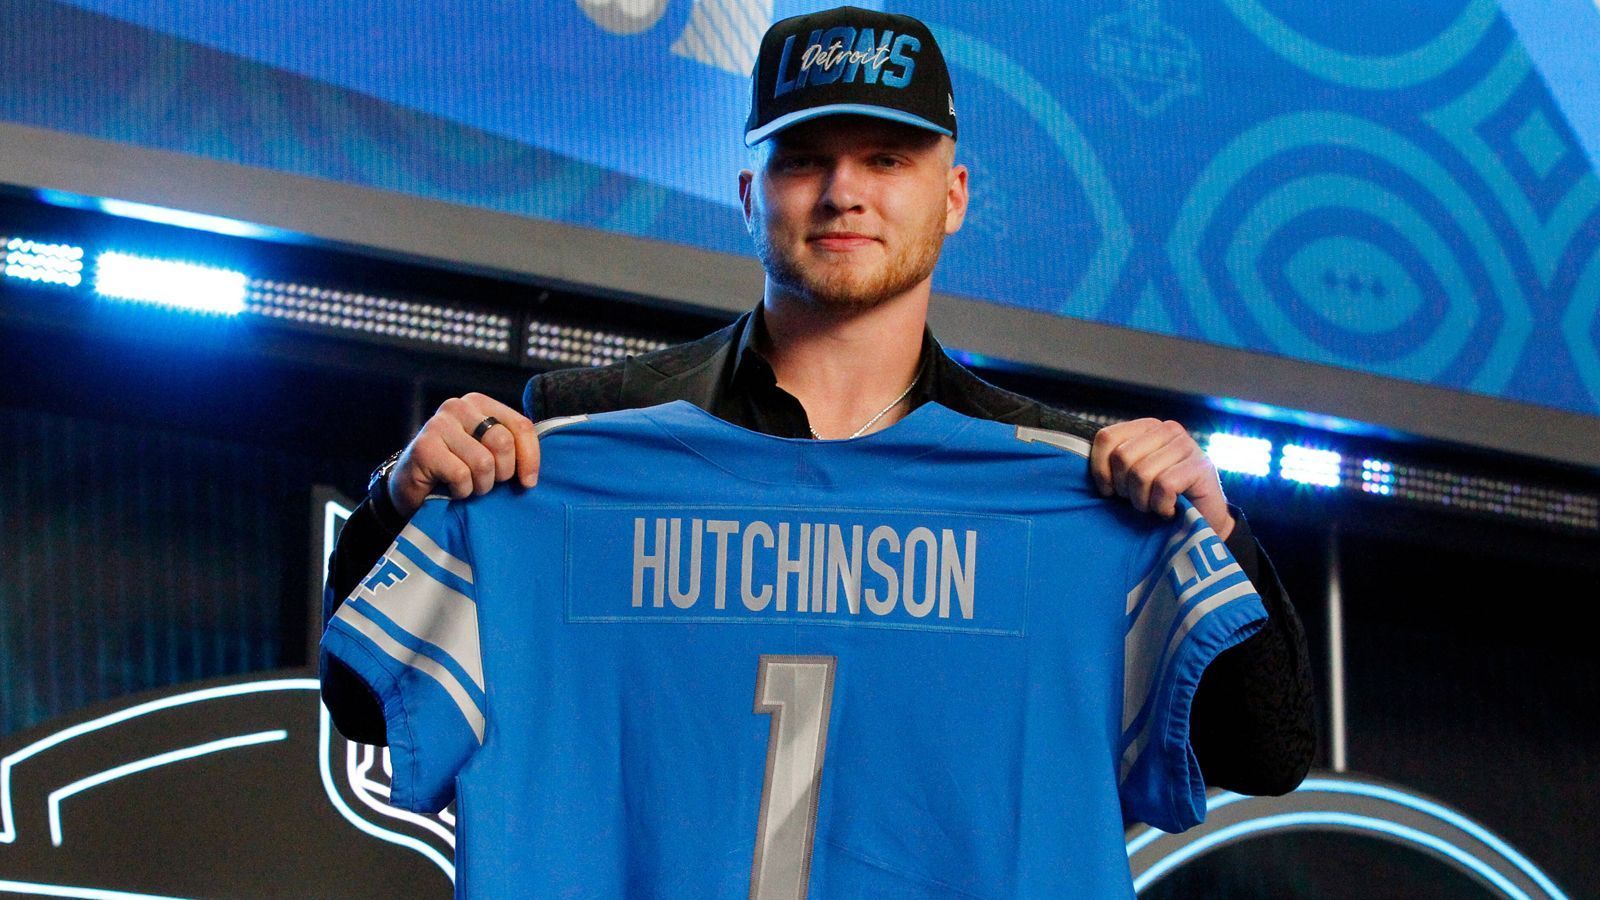 
                <strong>2. Pick: Aidan Hutchinson (Defensive End, Detroit Lions)</strong><br>
                &#x2022; <strong>Vertrag unterschrieben: ja</strong><br>&#x2022; <strong>Signing Bonus</strong>: 23.153.372 US-Dollar <br>&#x2022; <strong>Gesamtgehalt</strong>: 35.713.386 US-Dollar<br>
              